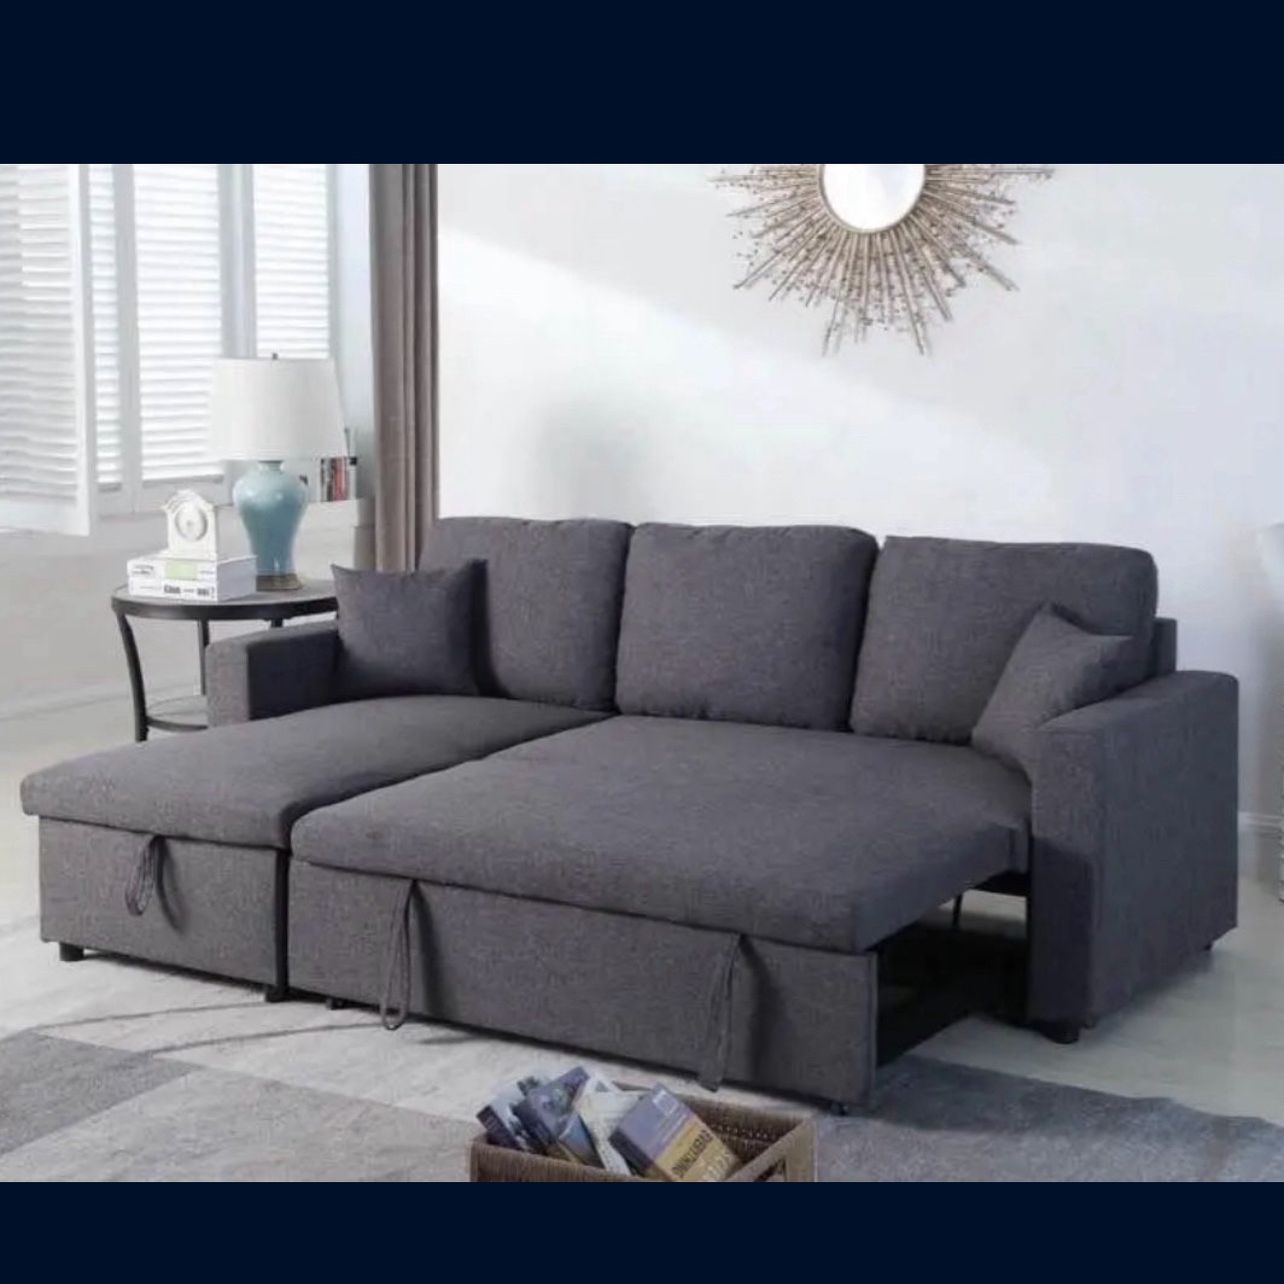 Living room set Sectional Sofa Pullout Bed W / Chaise Storage Fabric 88” X 57” x33”H